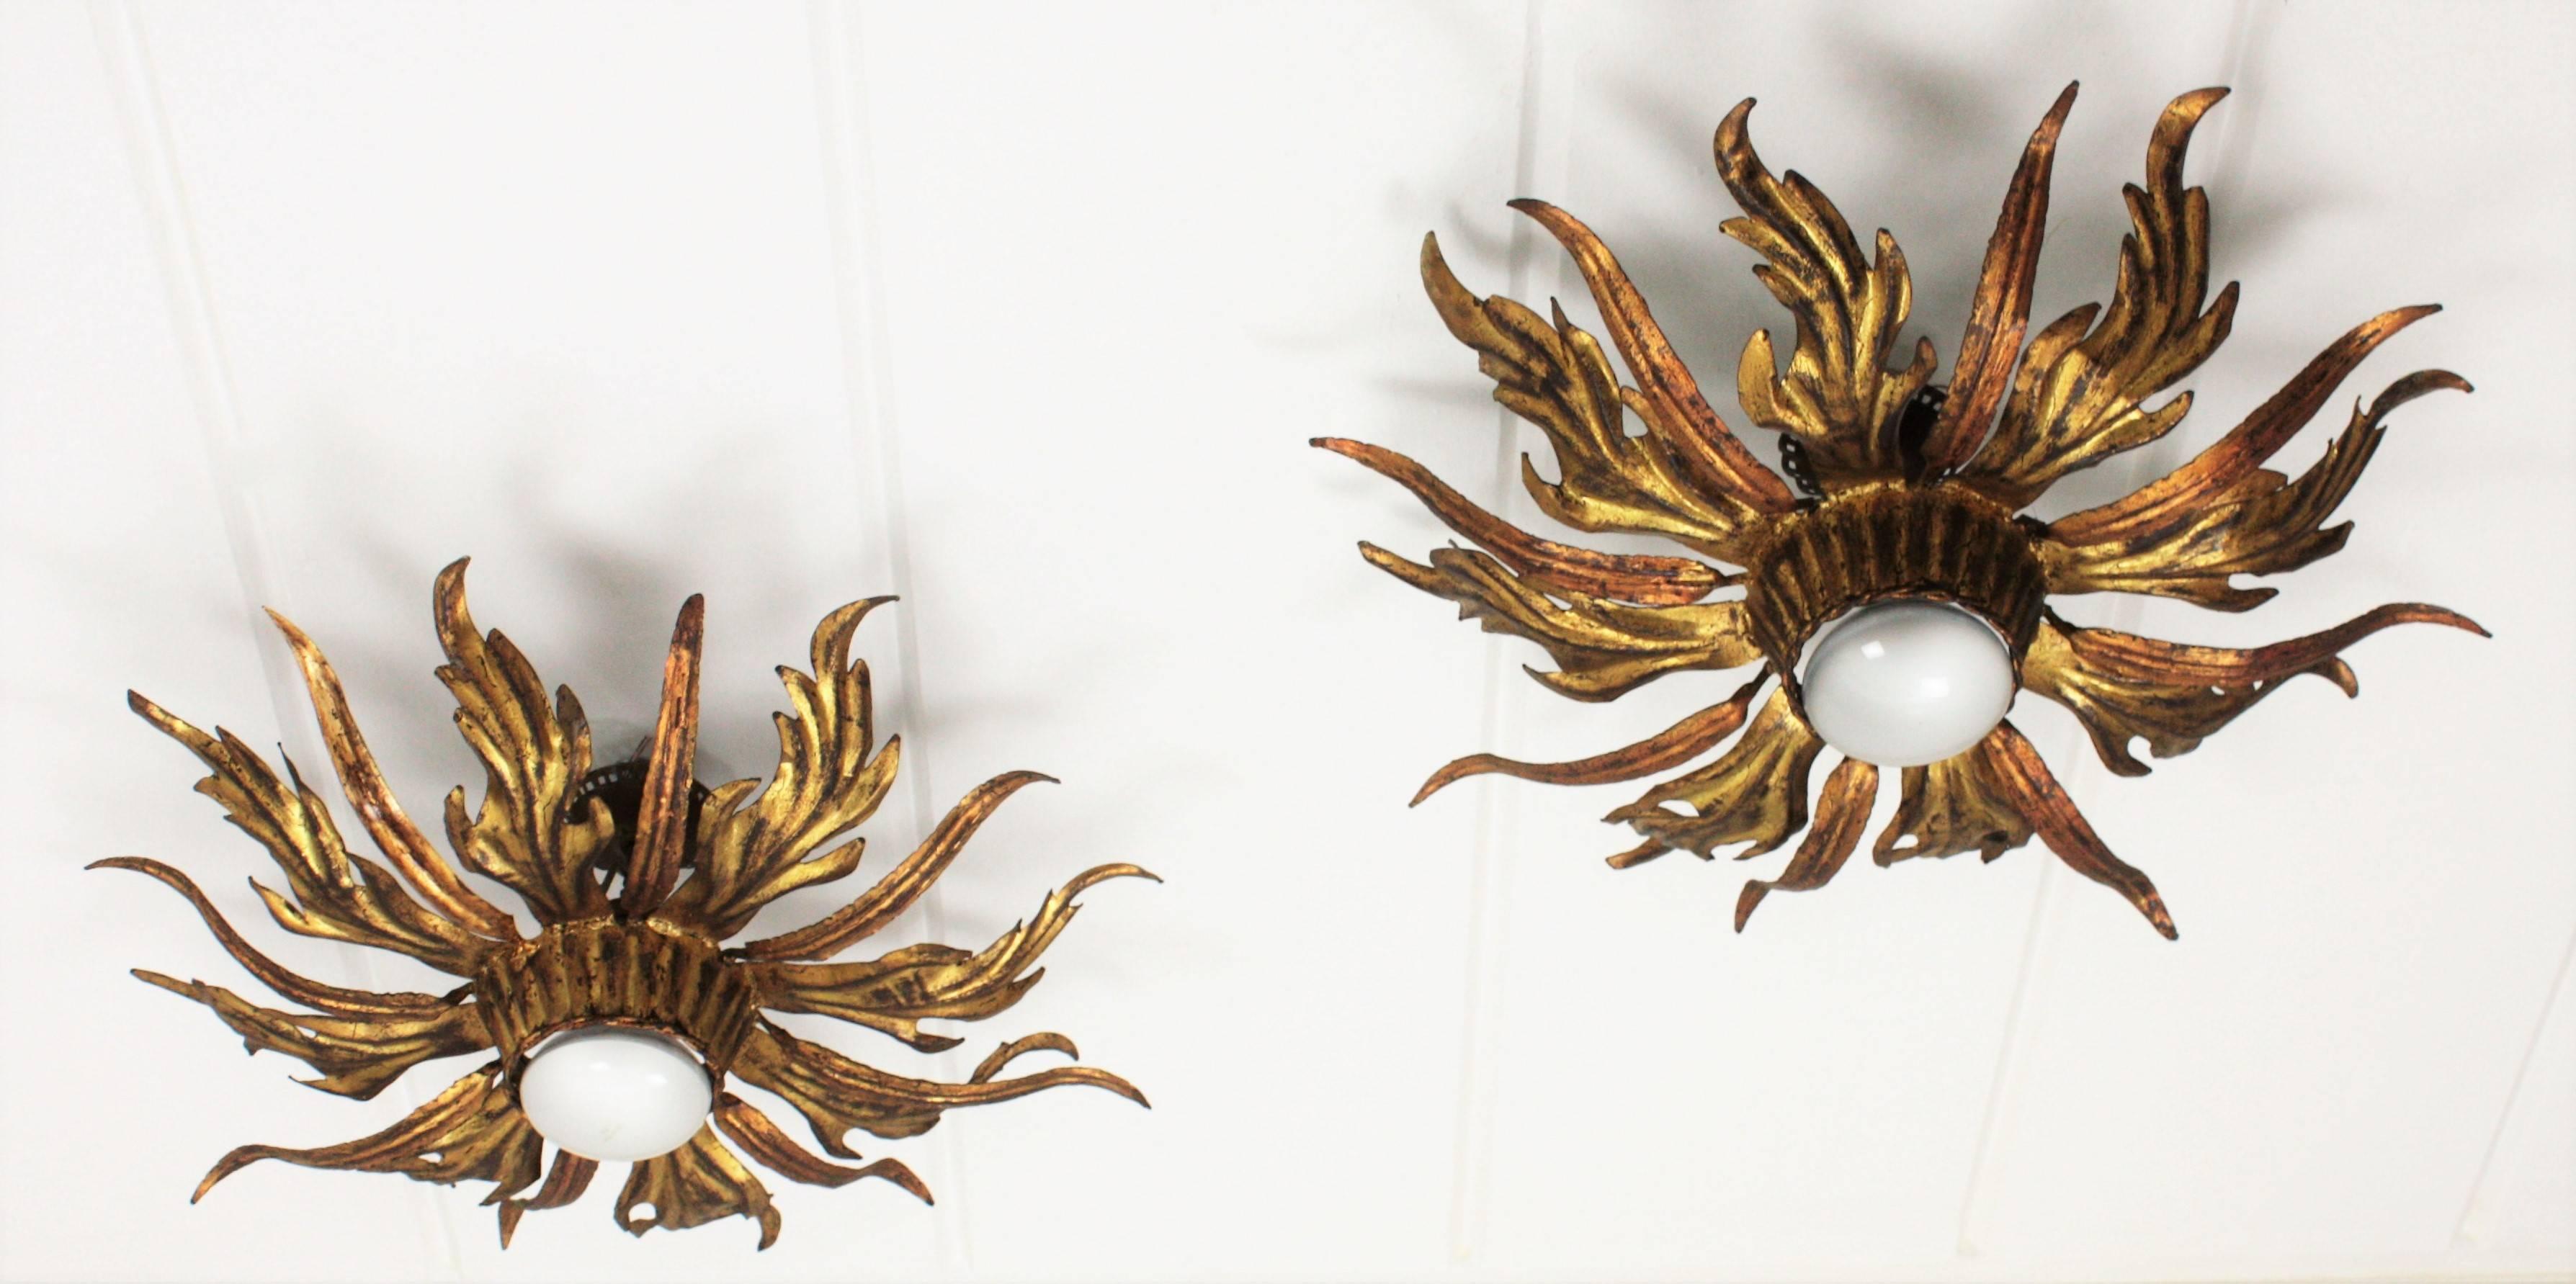 A superb pair of hand-hammered iron leafed sunburst light fixtures with leaves in two tones, coppered and gilt. Their different shaped leaves and the two colors make them highly decorative. They show their original vintage patina and they have been